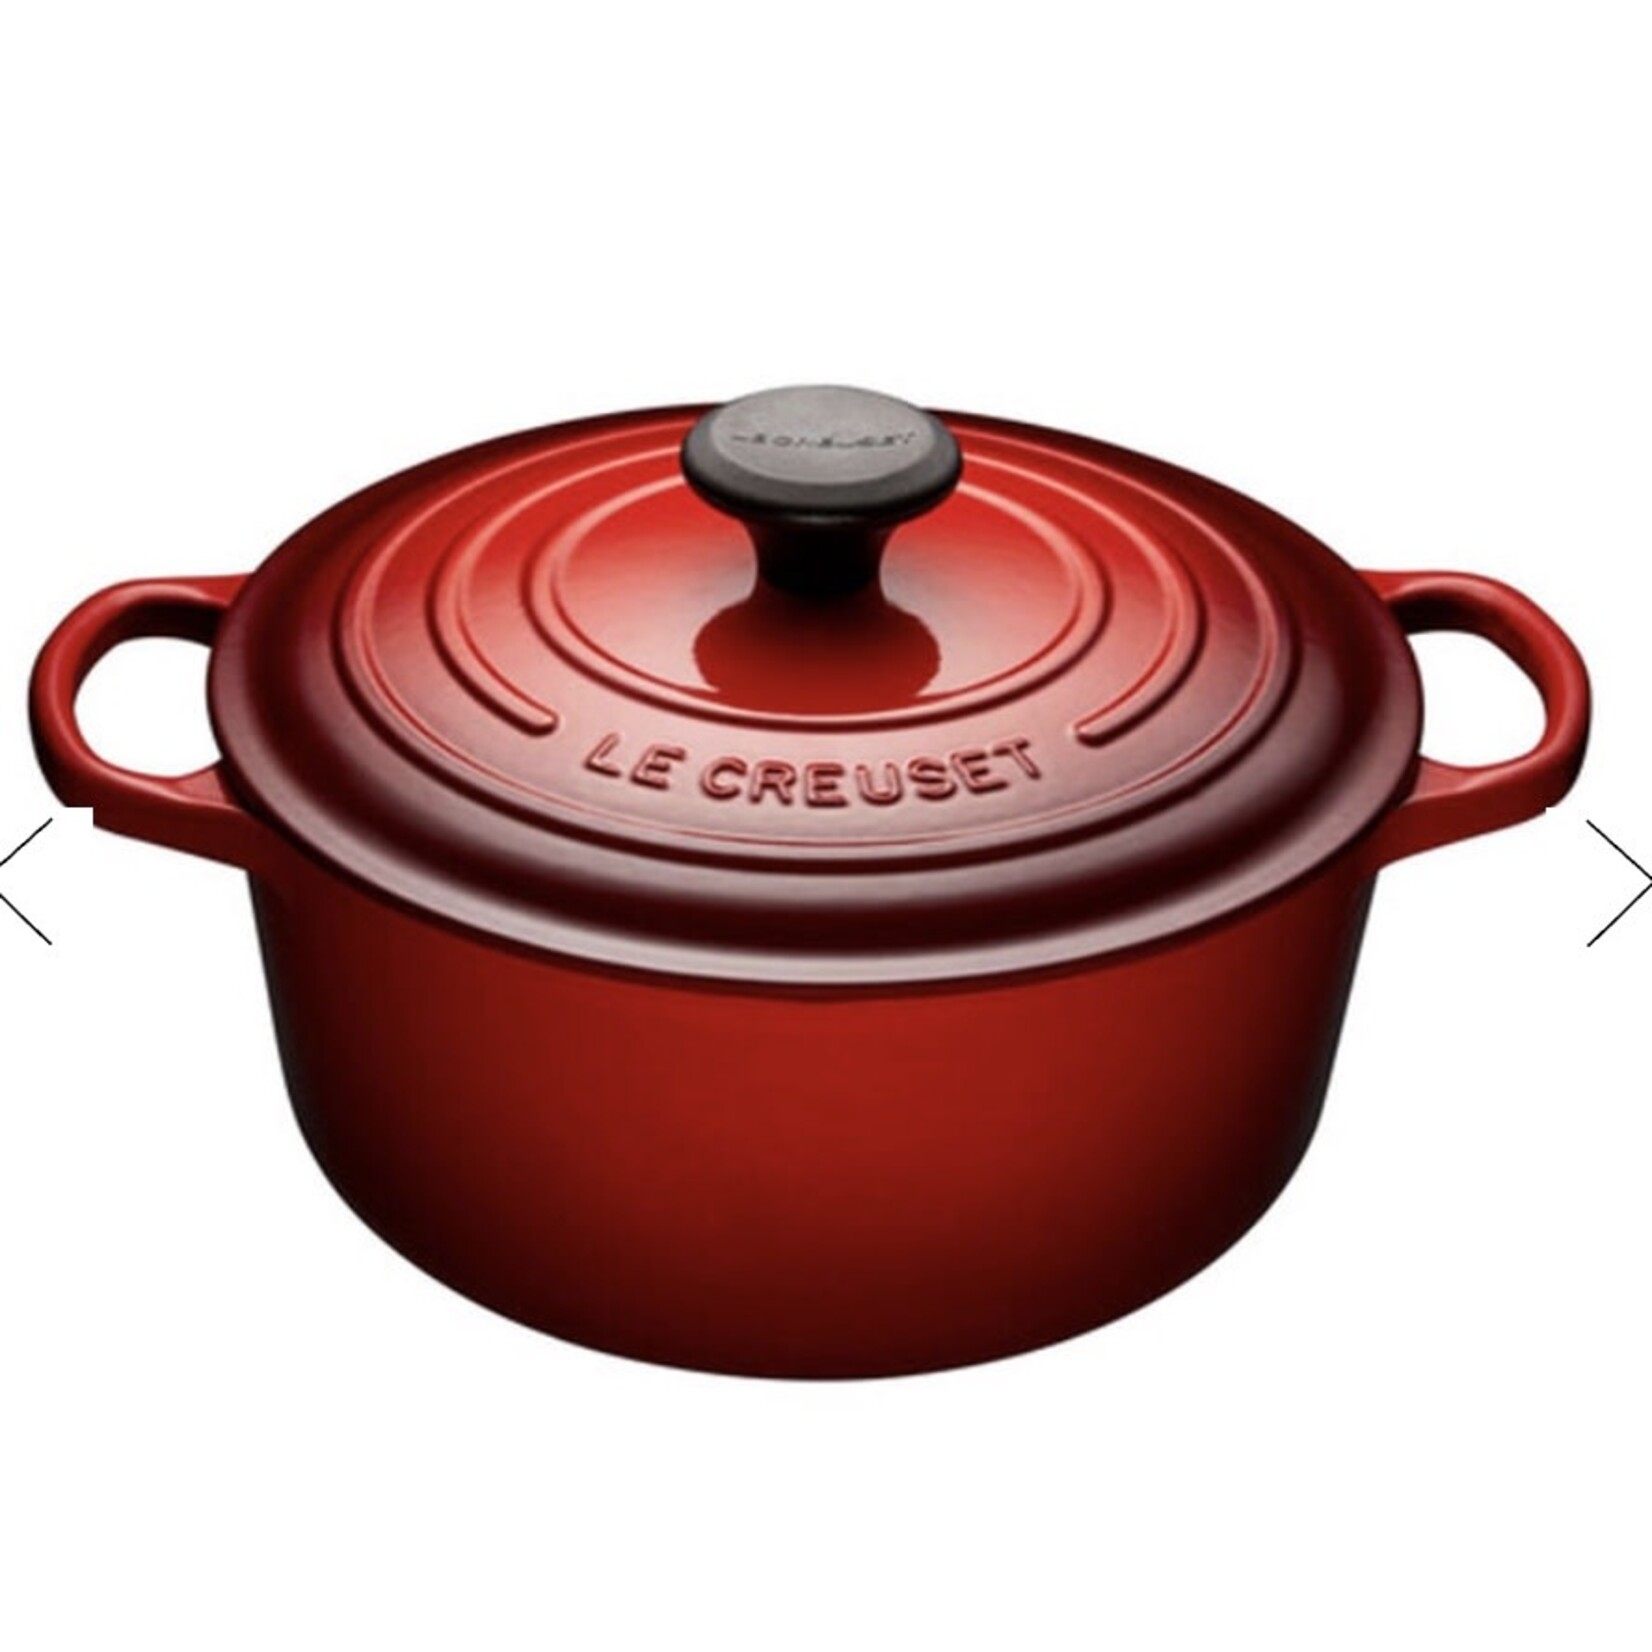 LE CREUSET LE CREUSET Round French Oven 4.1L - Cherry